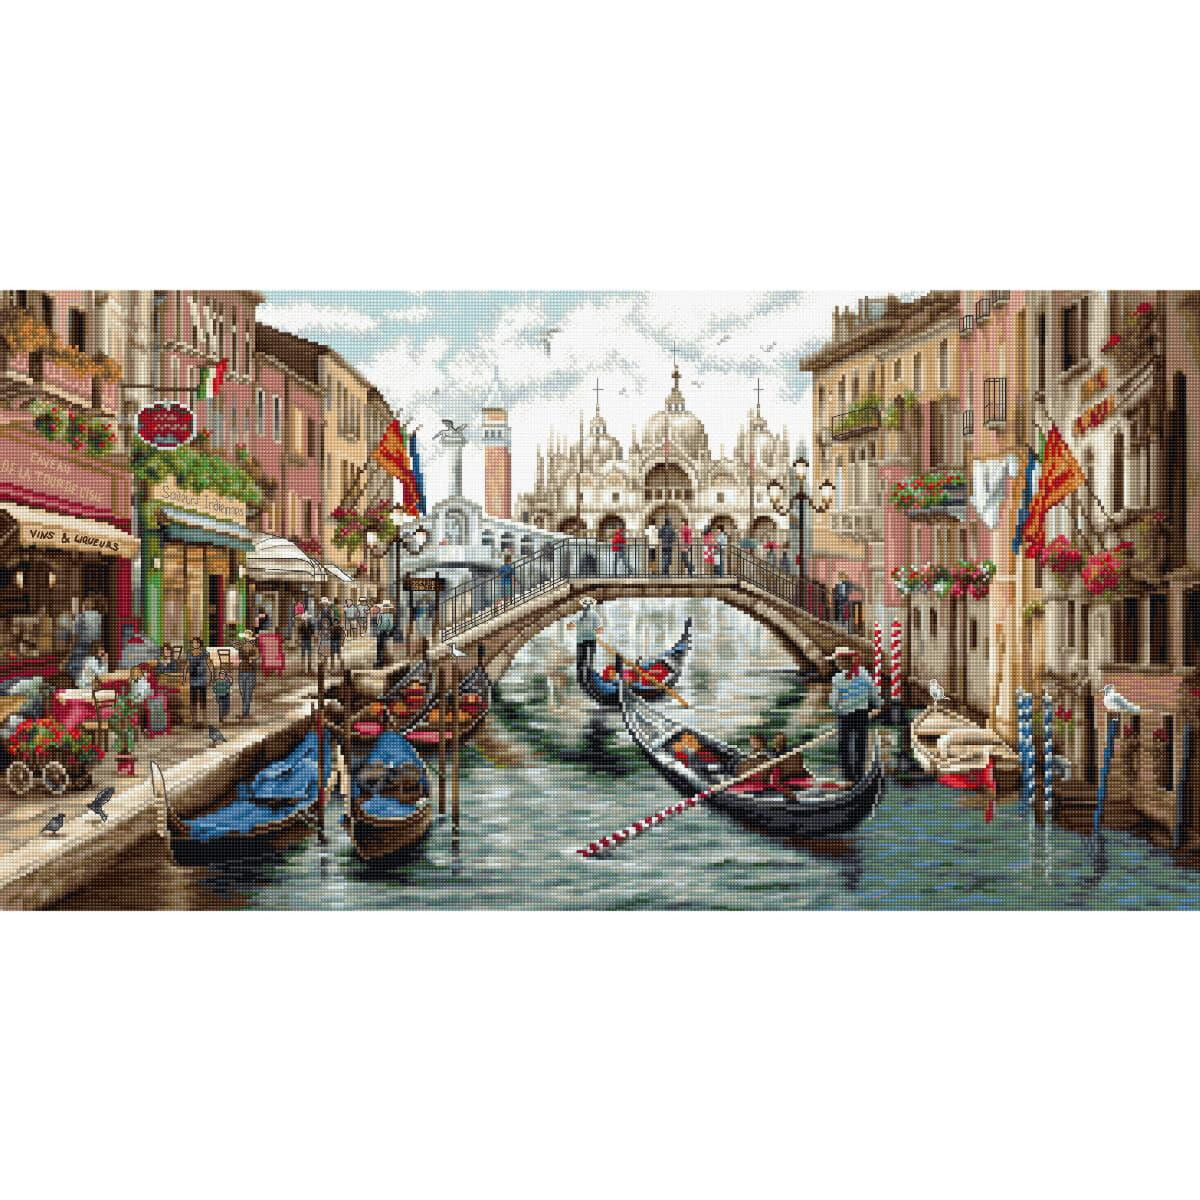 A busy canal scene in Venice shows gondolas sailing on...